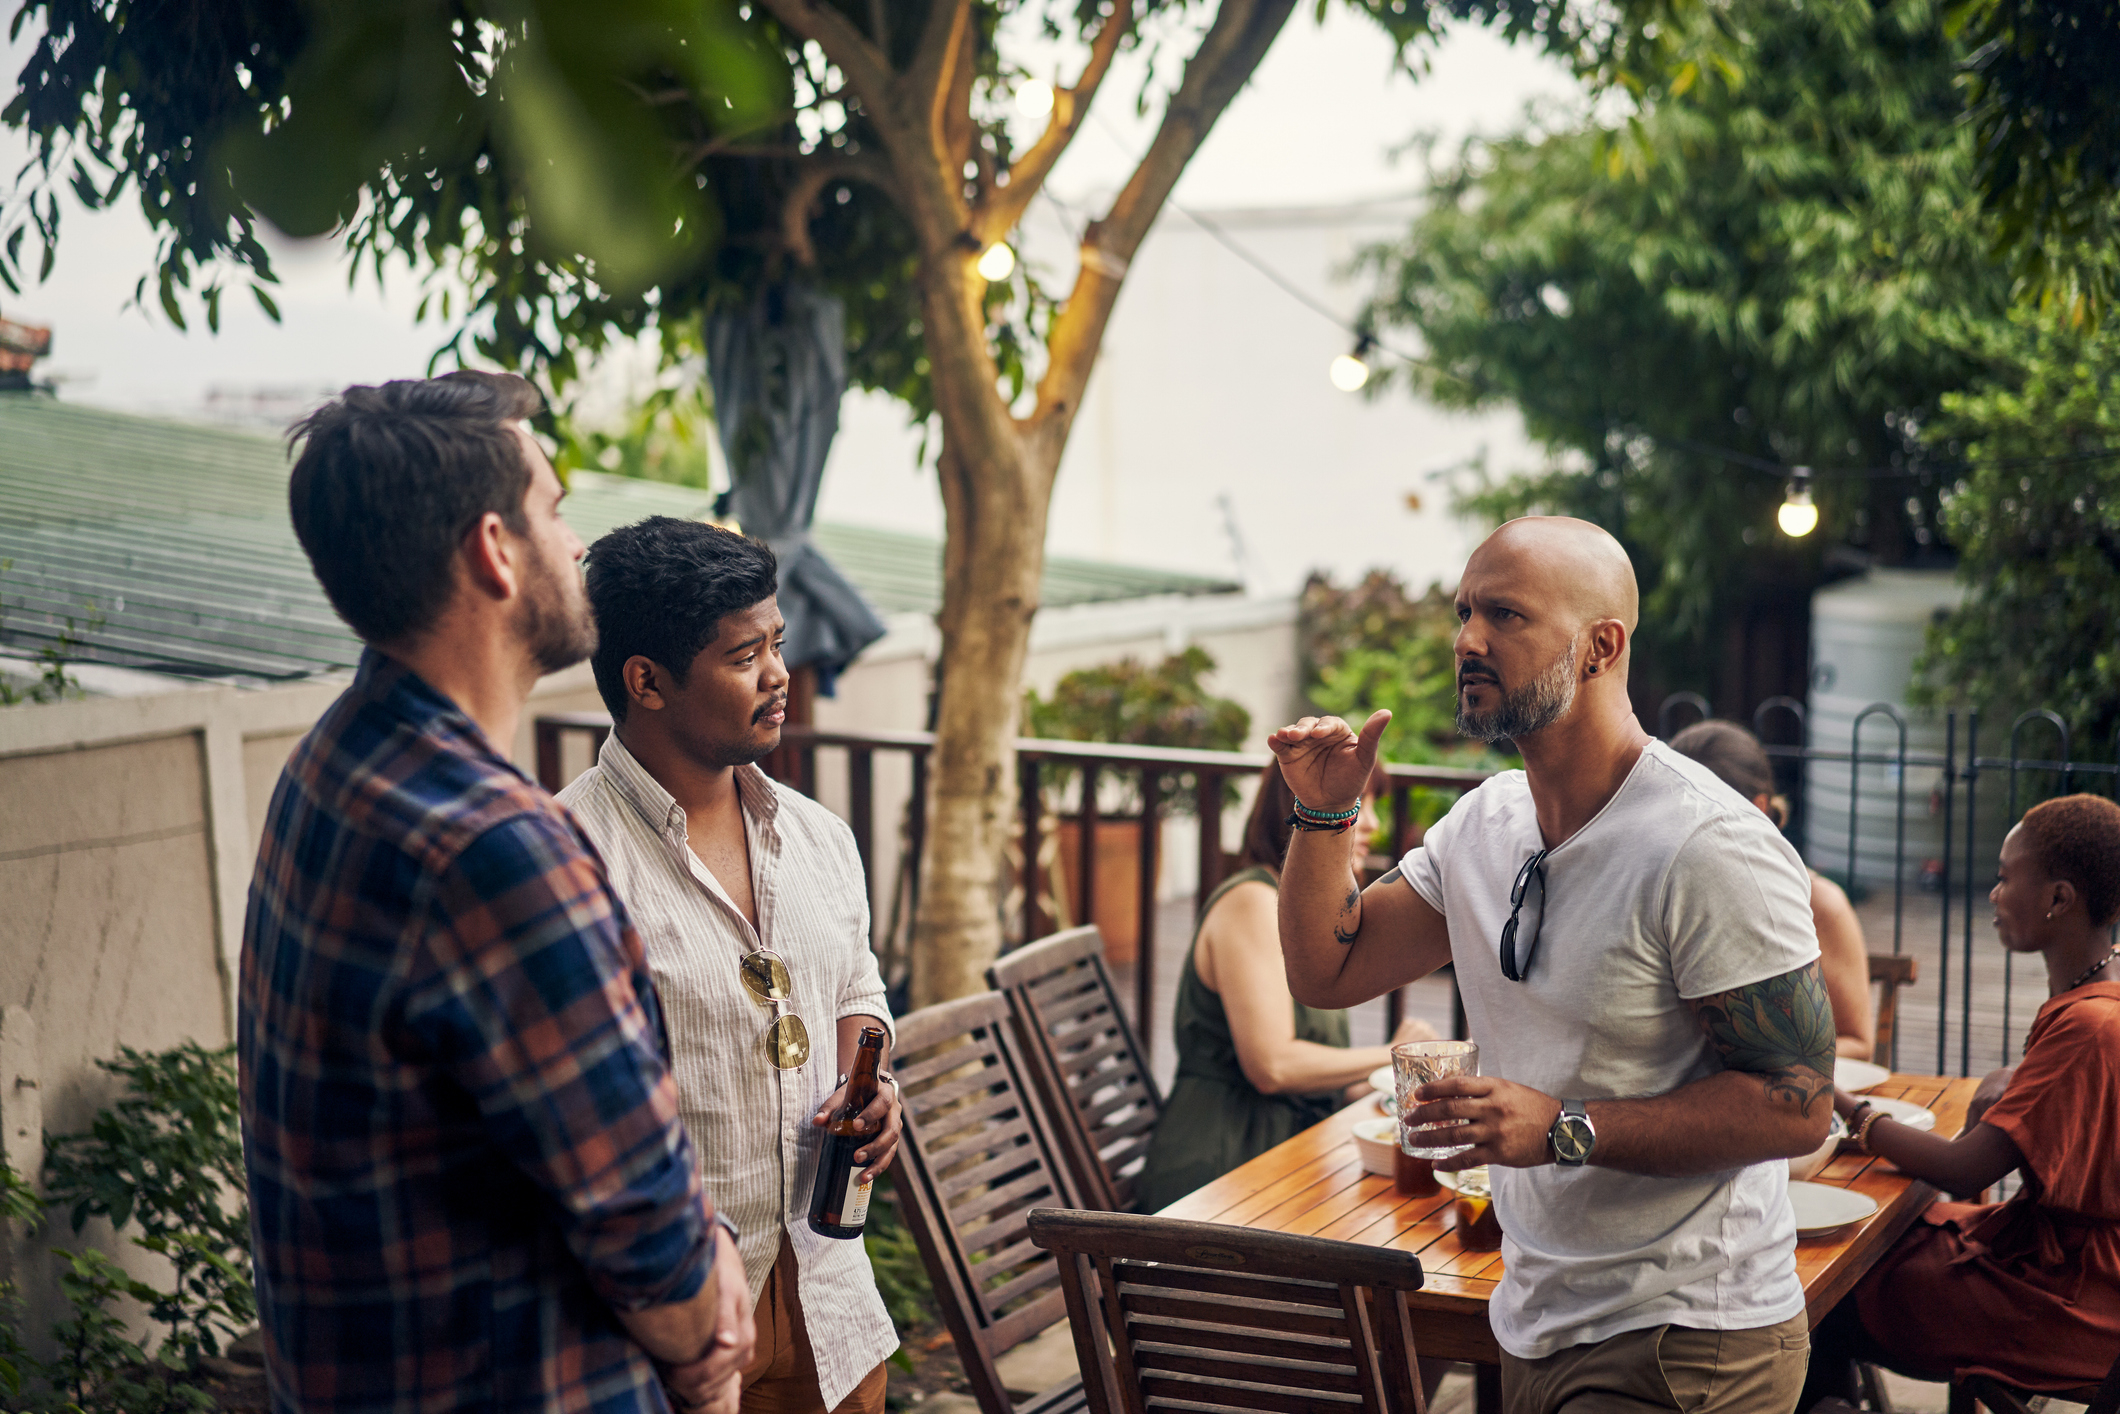 Group of people enjoying an outdoor gathering; three men in the foreground engaging in conversation, with others seated around a wooden table in the background